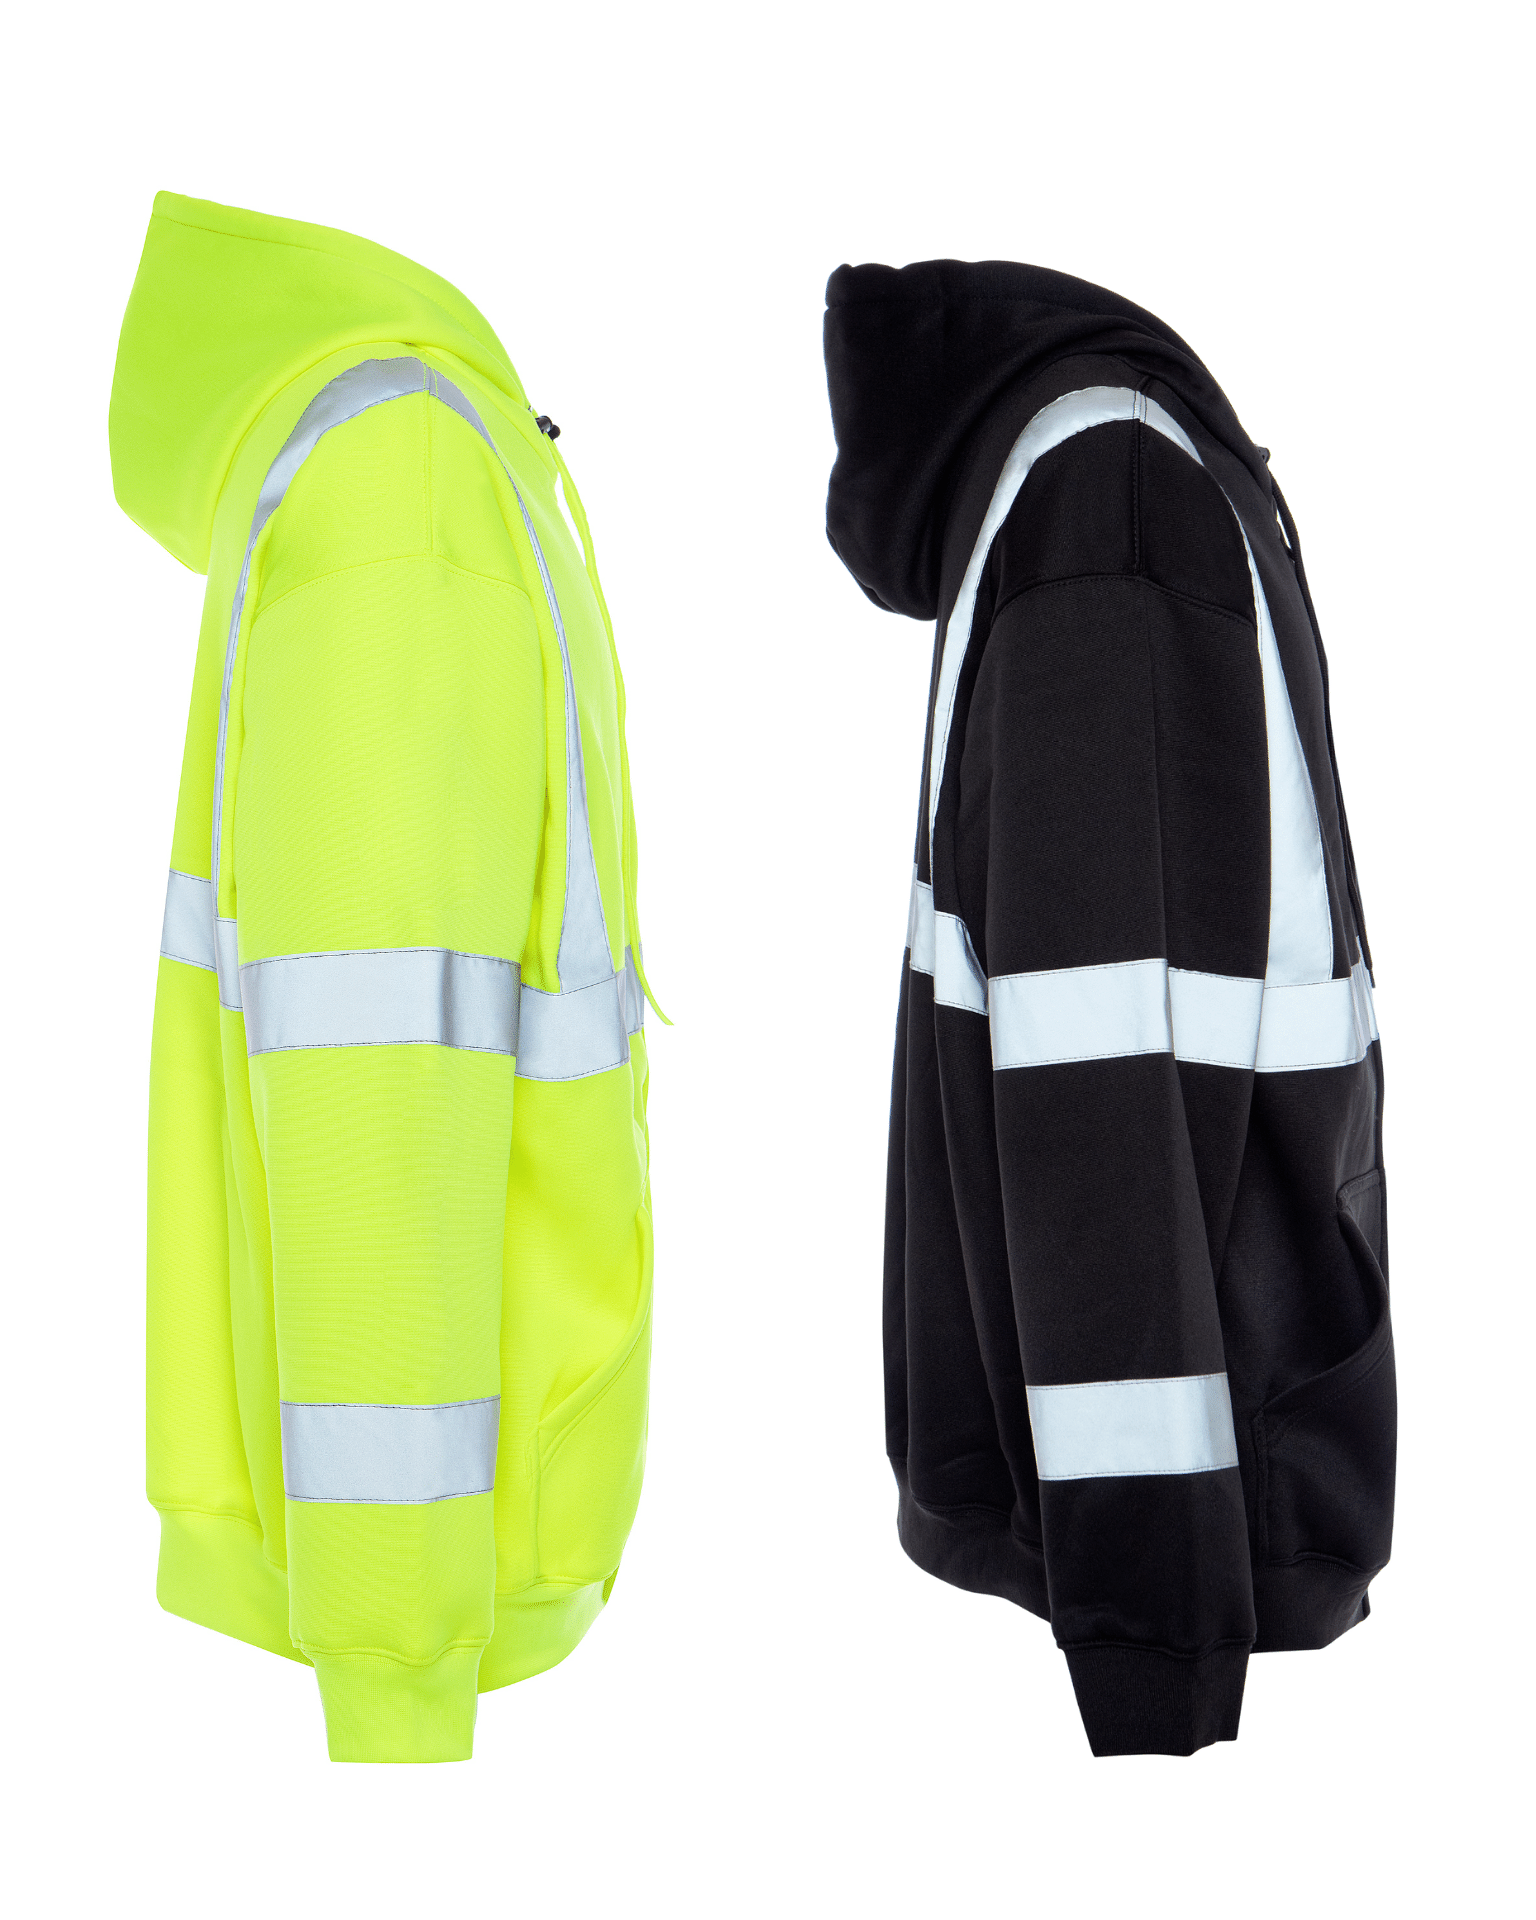 ANSI Class 3 High Visibility sweatshirt soft shell breathable safety striped by Utility Pro